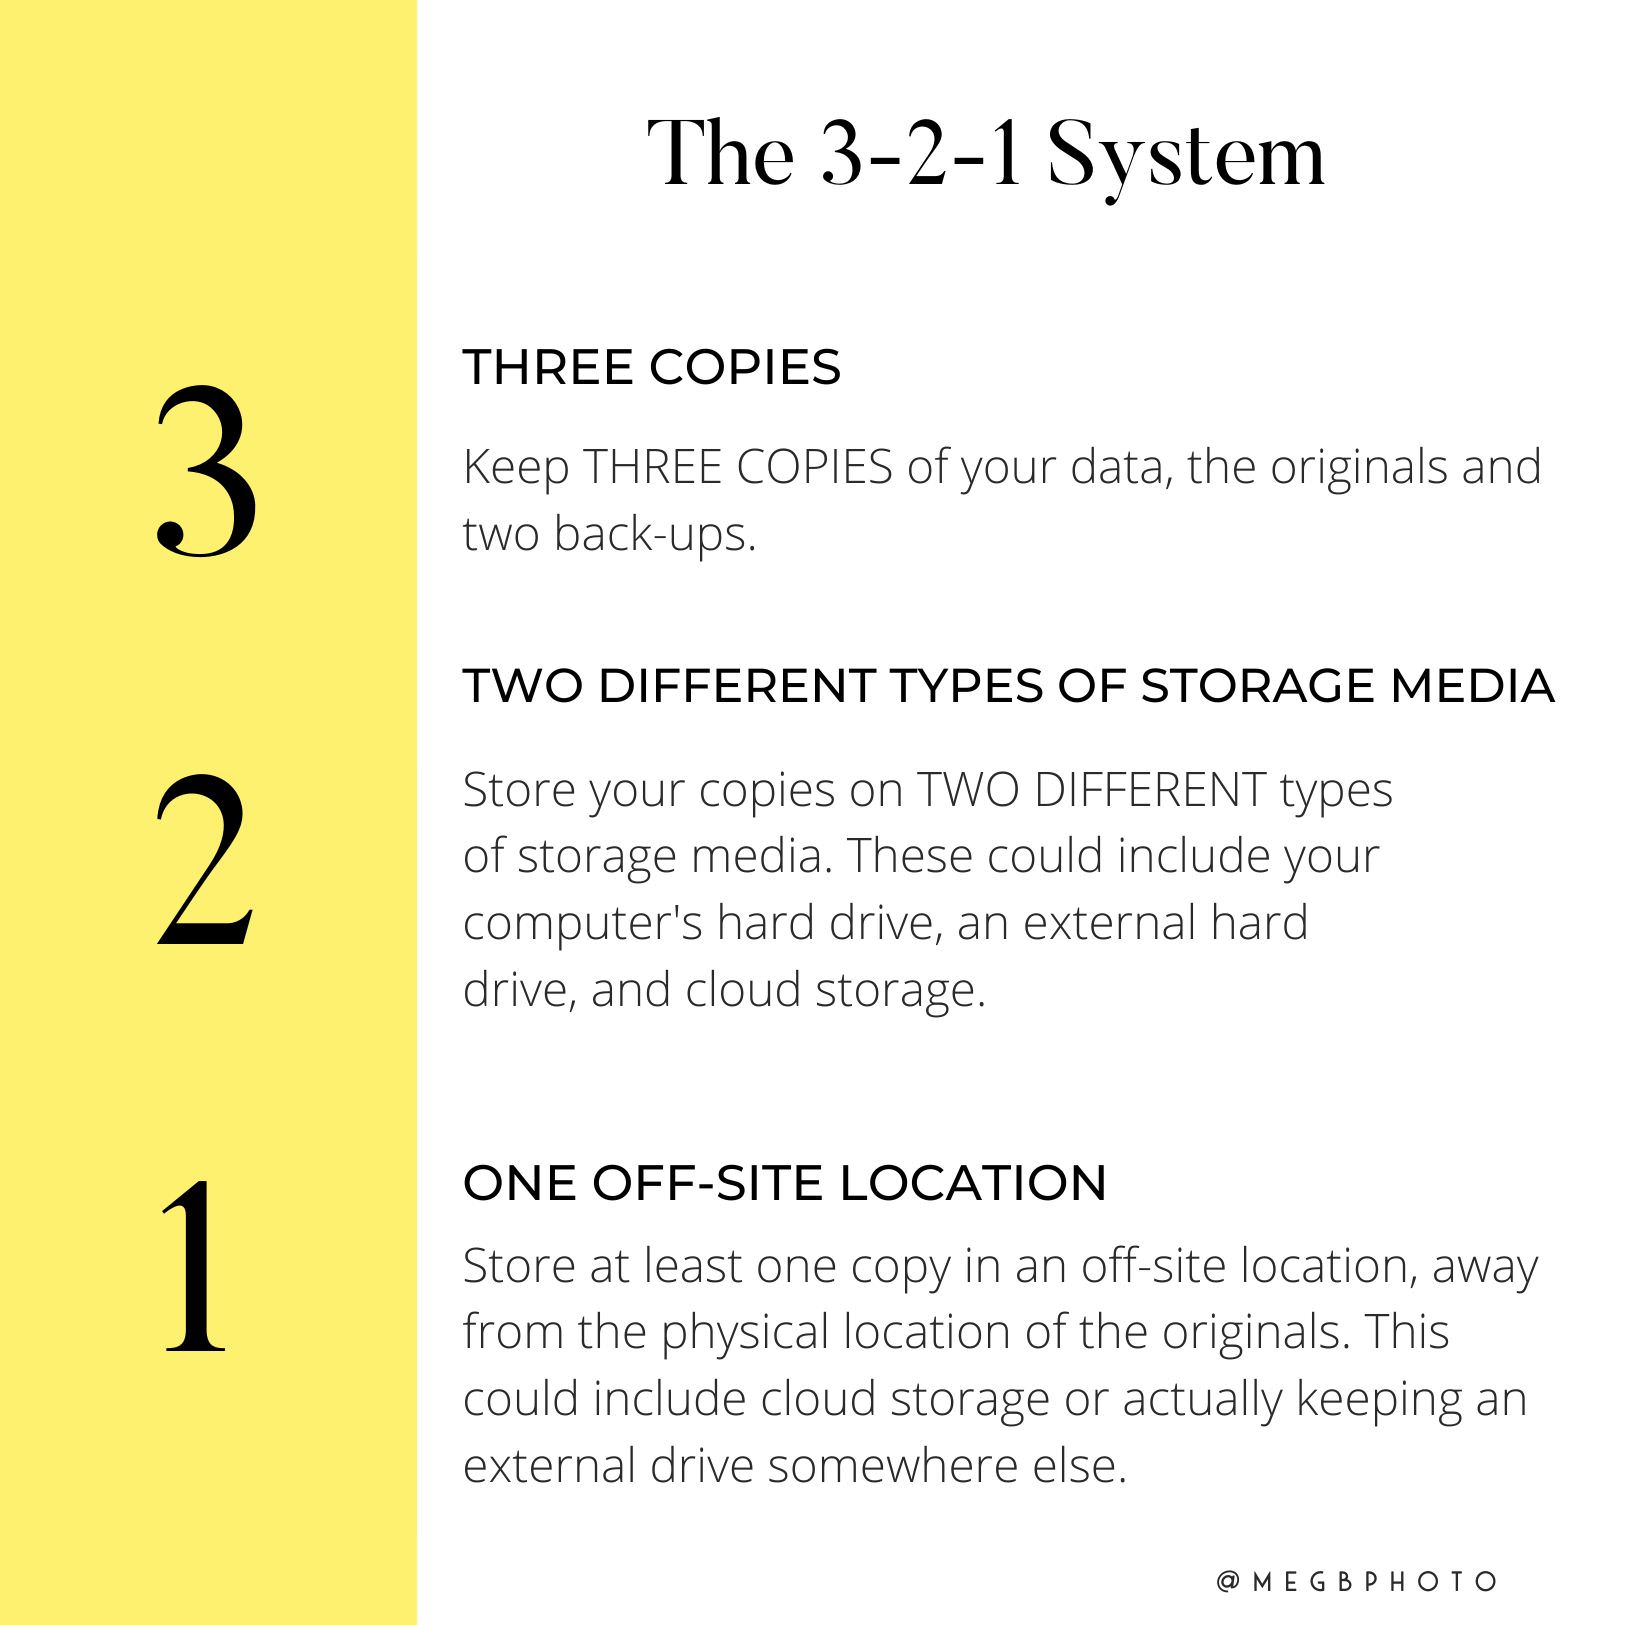 A graphic explaining The 3-2-1 Back-up System.